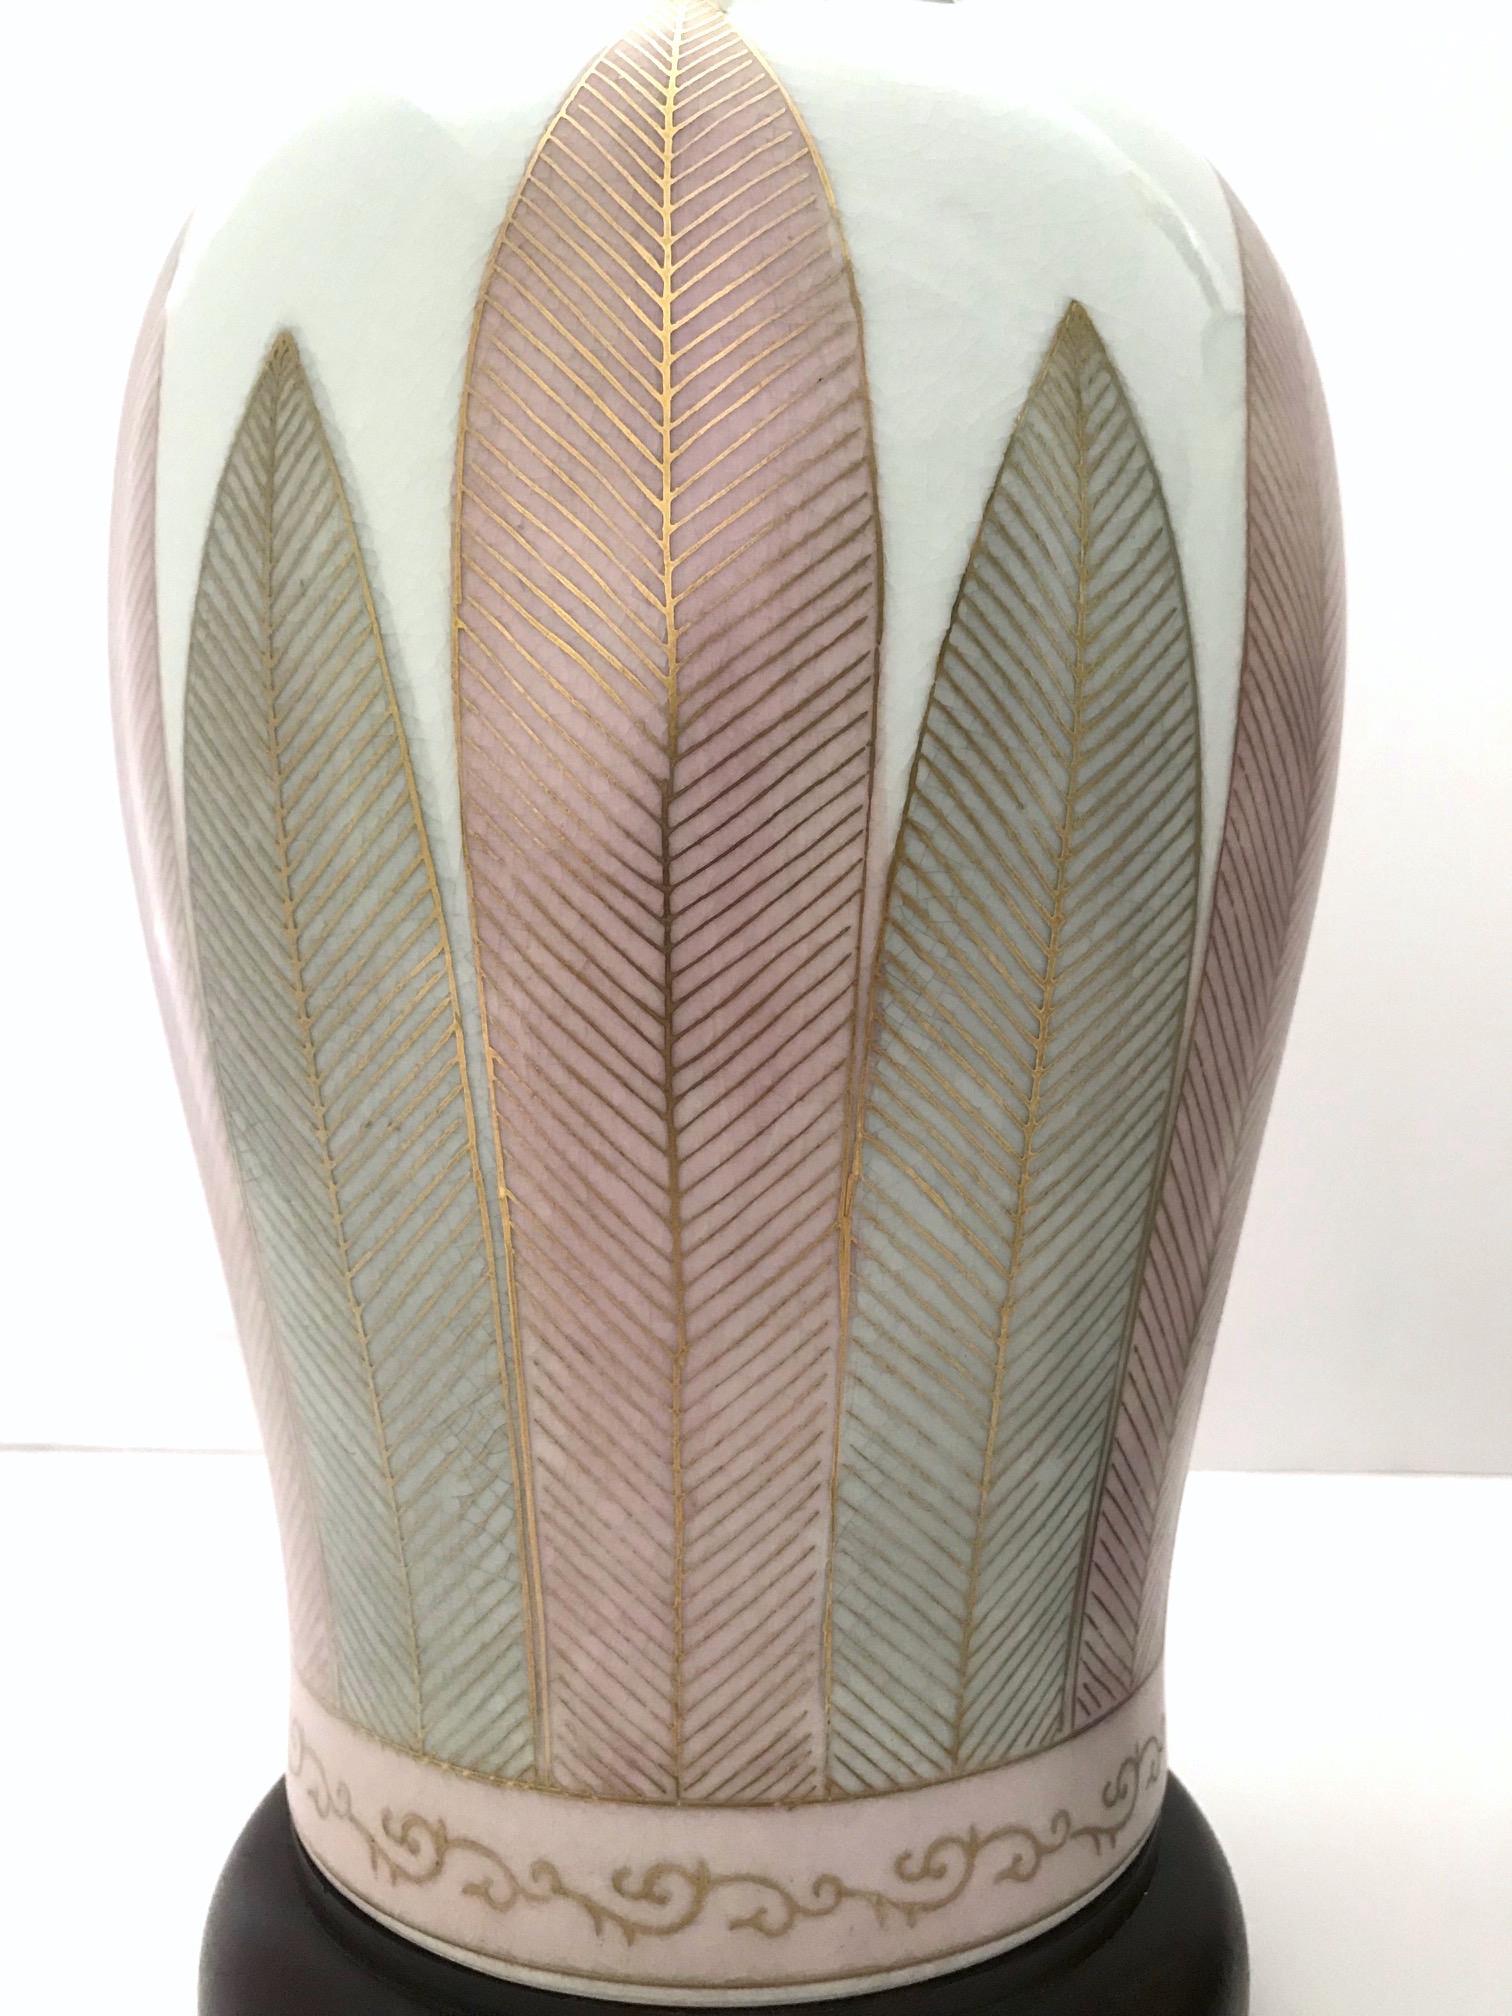 Pair of Japanese Hand Painted Porcelain Lamps in White, Grey, and Pink, C. 1970s In Excellent Condition For Sale In Fort Lauderdale, FL